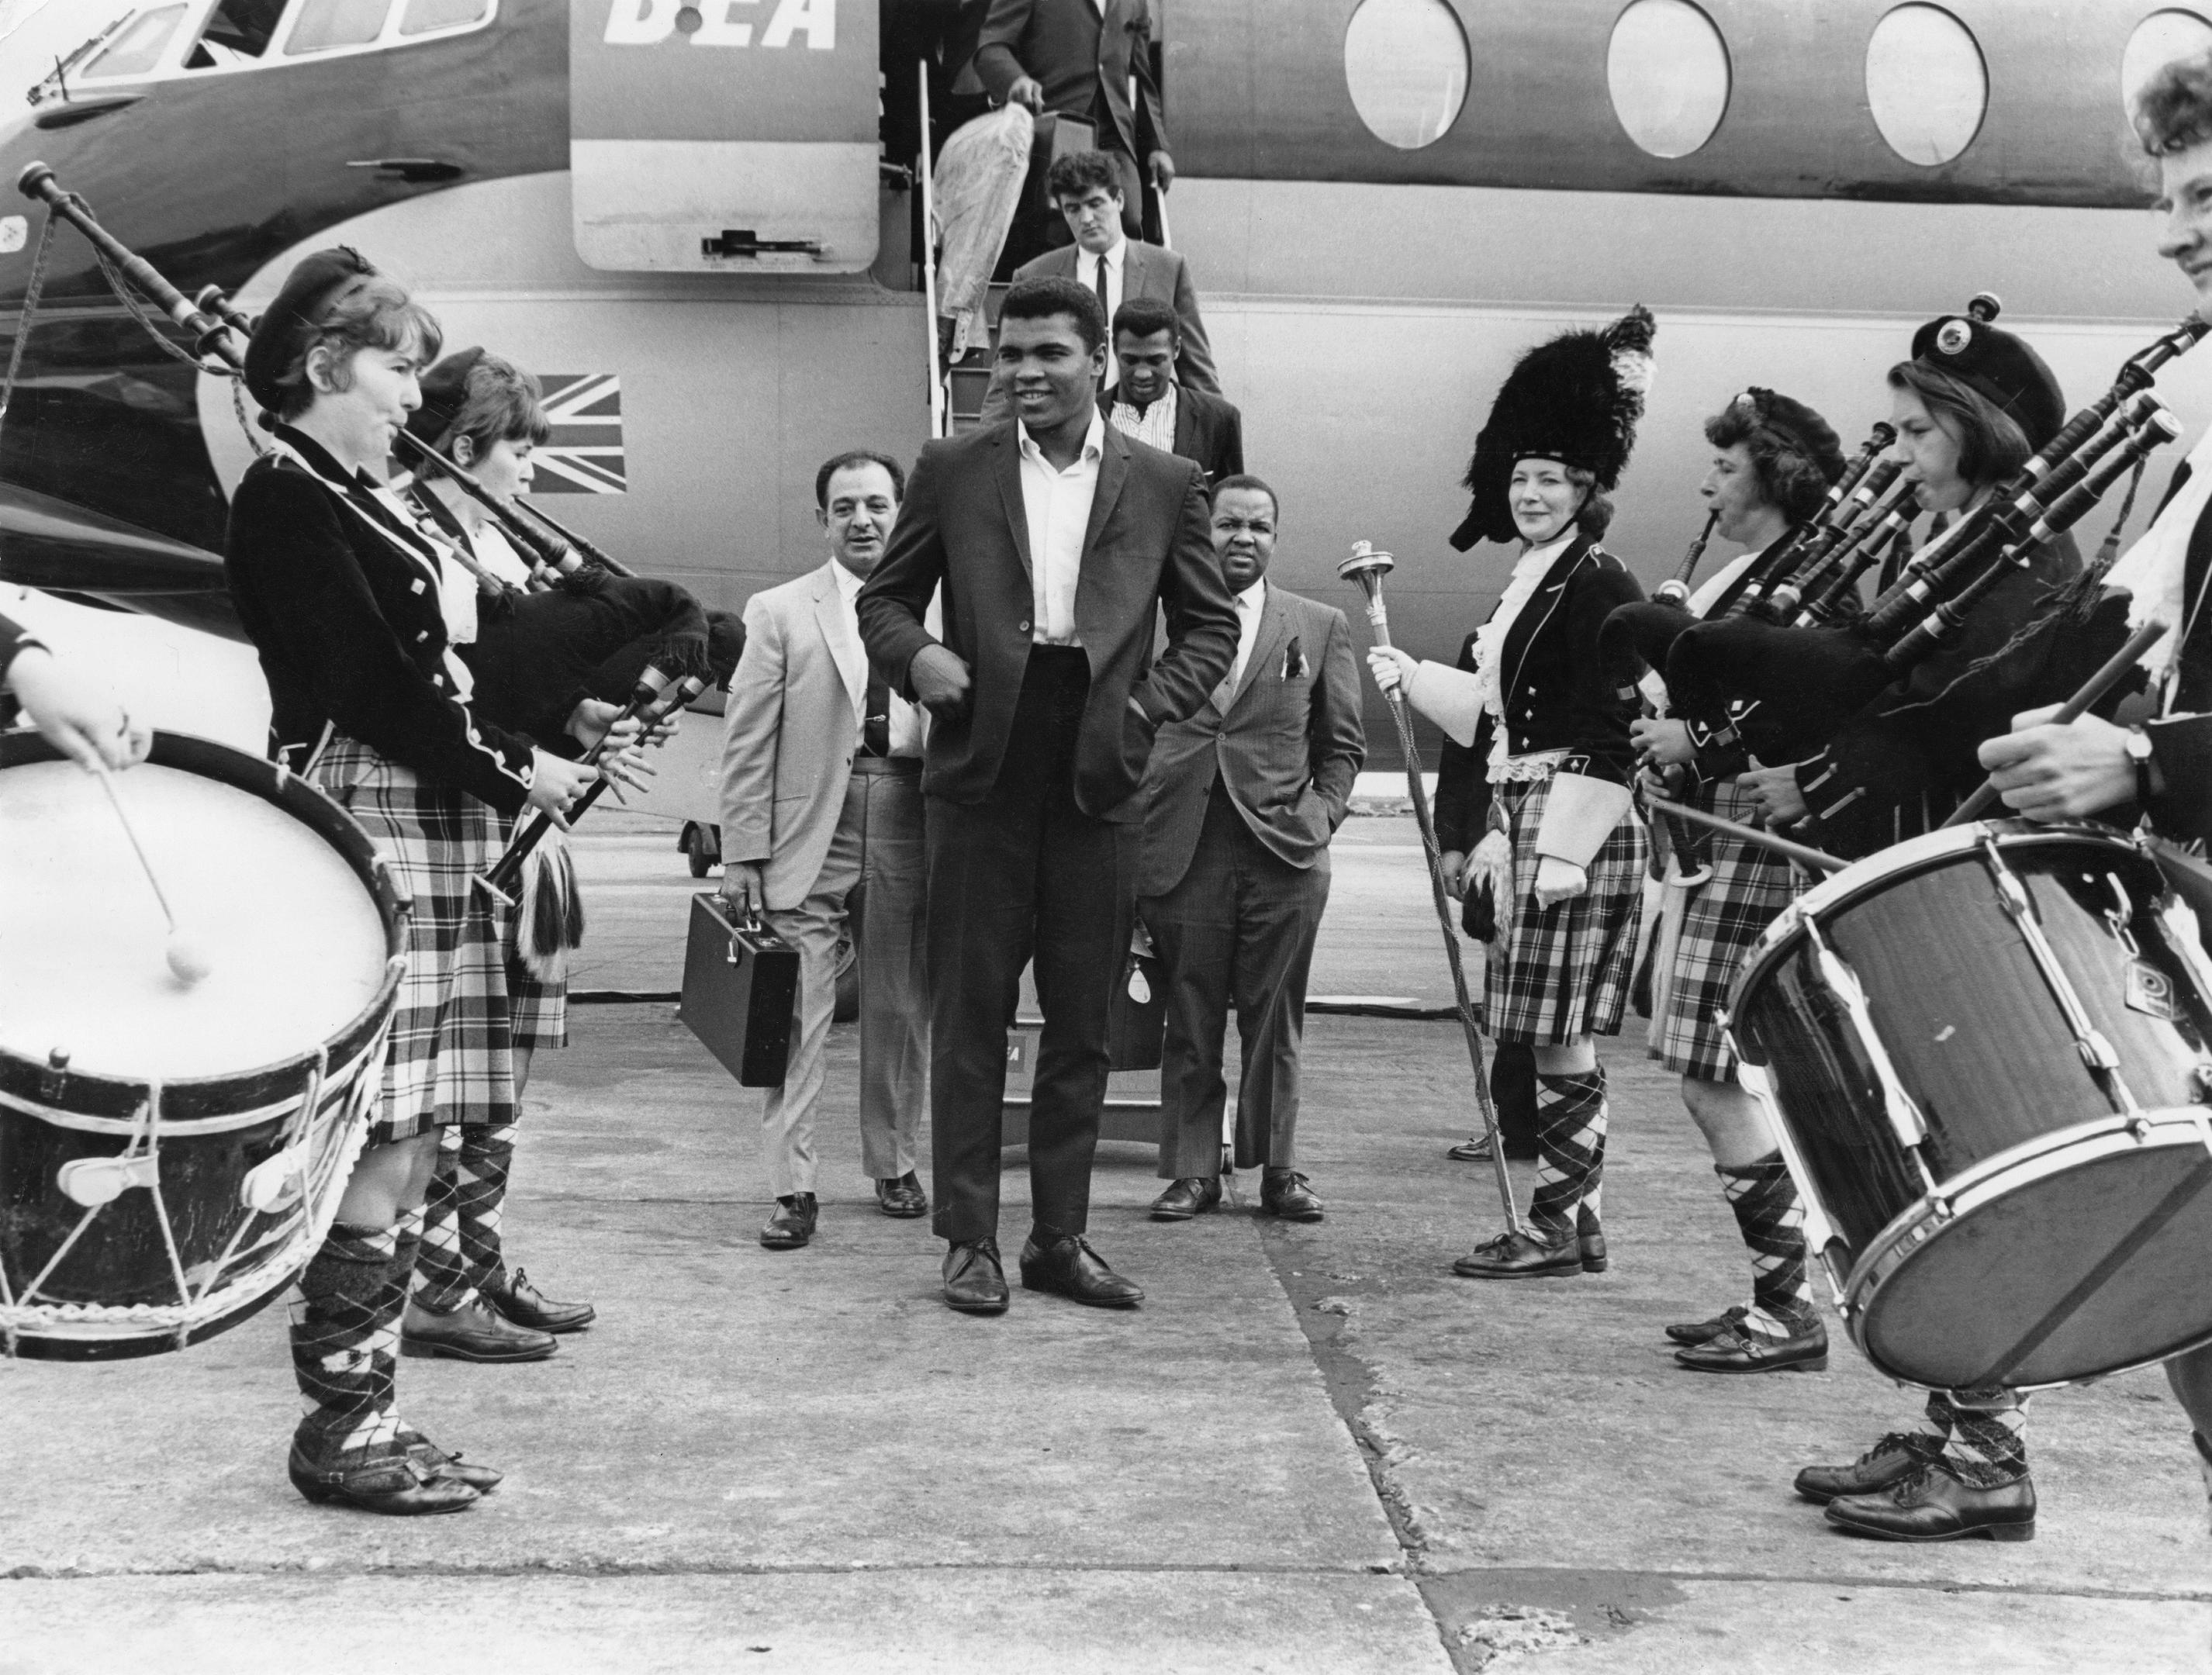 Muhammad Ali is greeted by a traditional Scottish pipe band on his arrival at Glasgow Airport, 18th August 1965 (Daily Express/Pictorial Parade/Archive Photos/Getty Images)